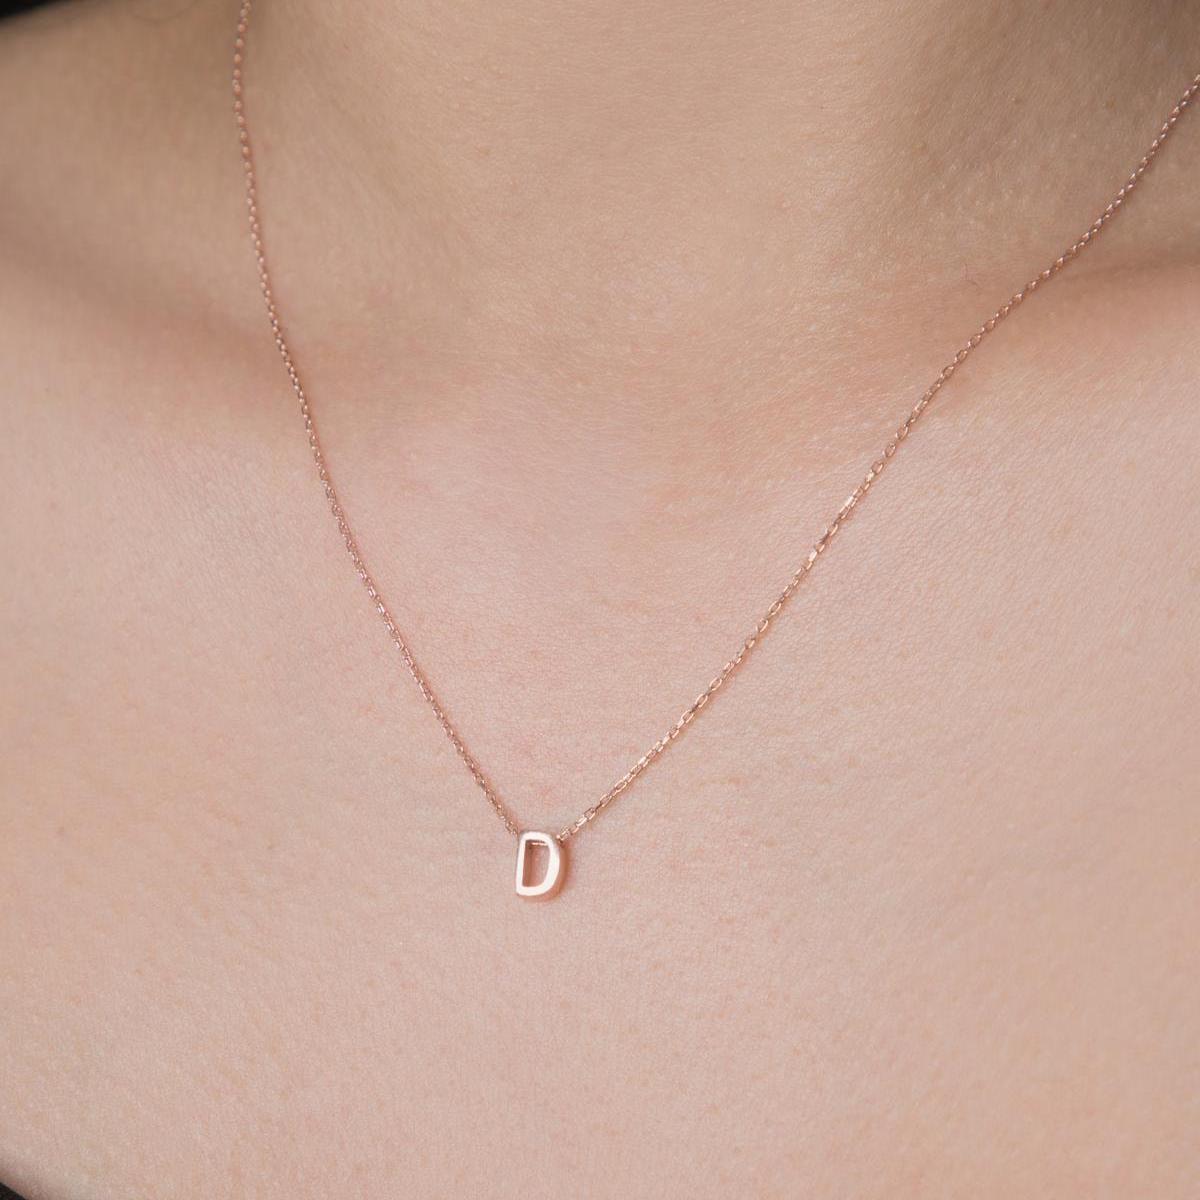 D Initial Necklace Rose • Rose Gold Initial Necklace • Gift For Her - Trending Silver Gifts